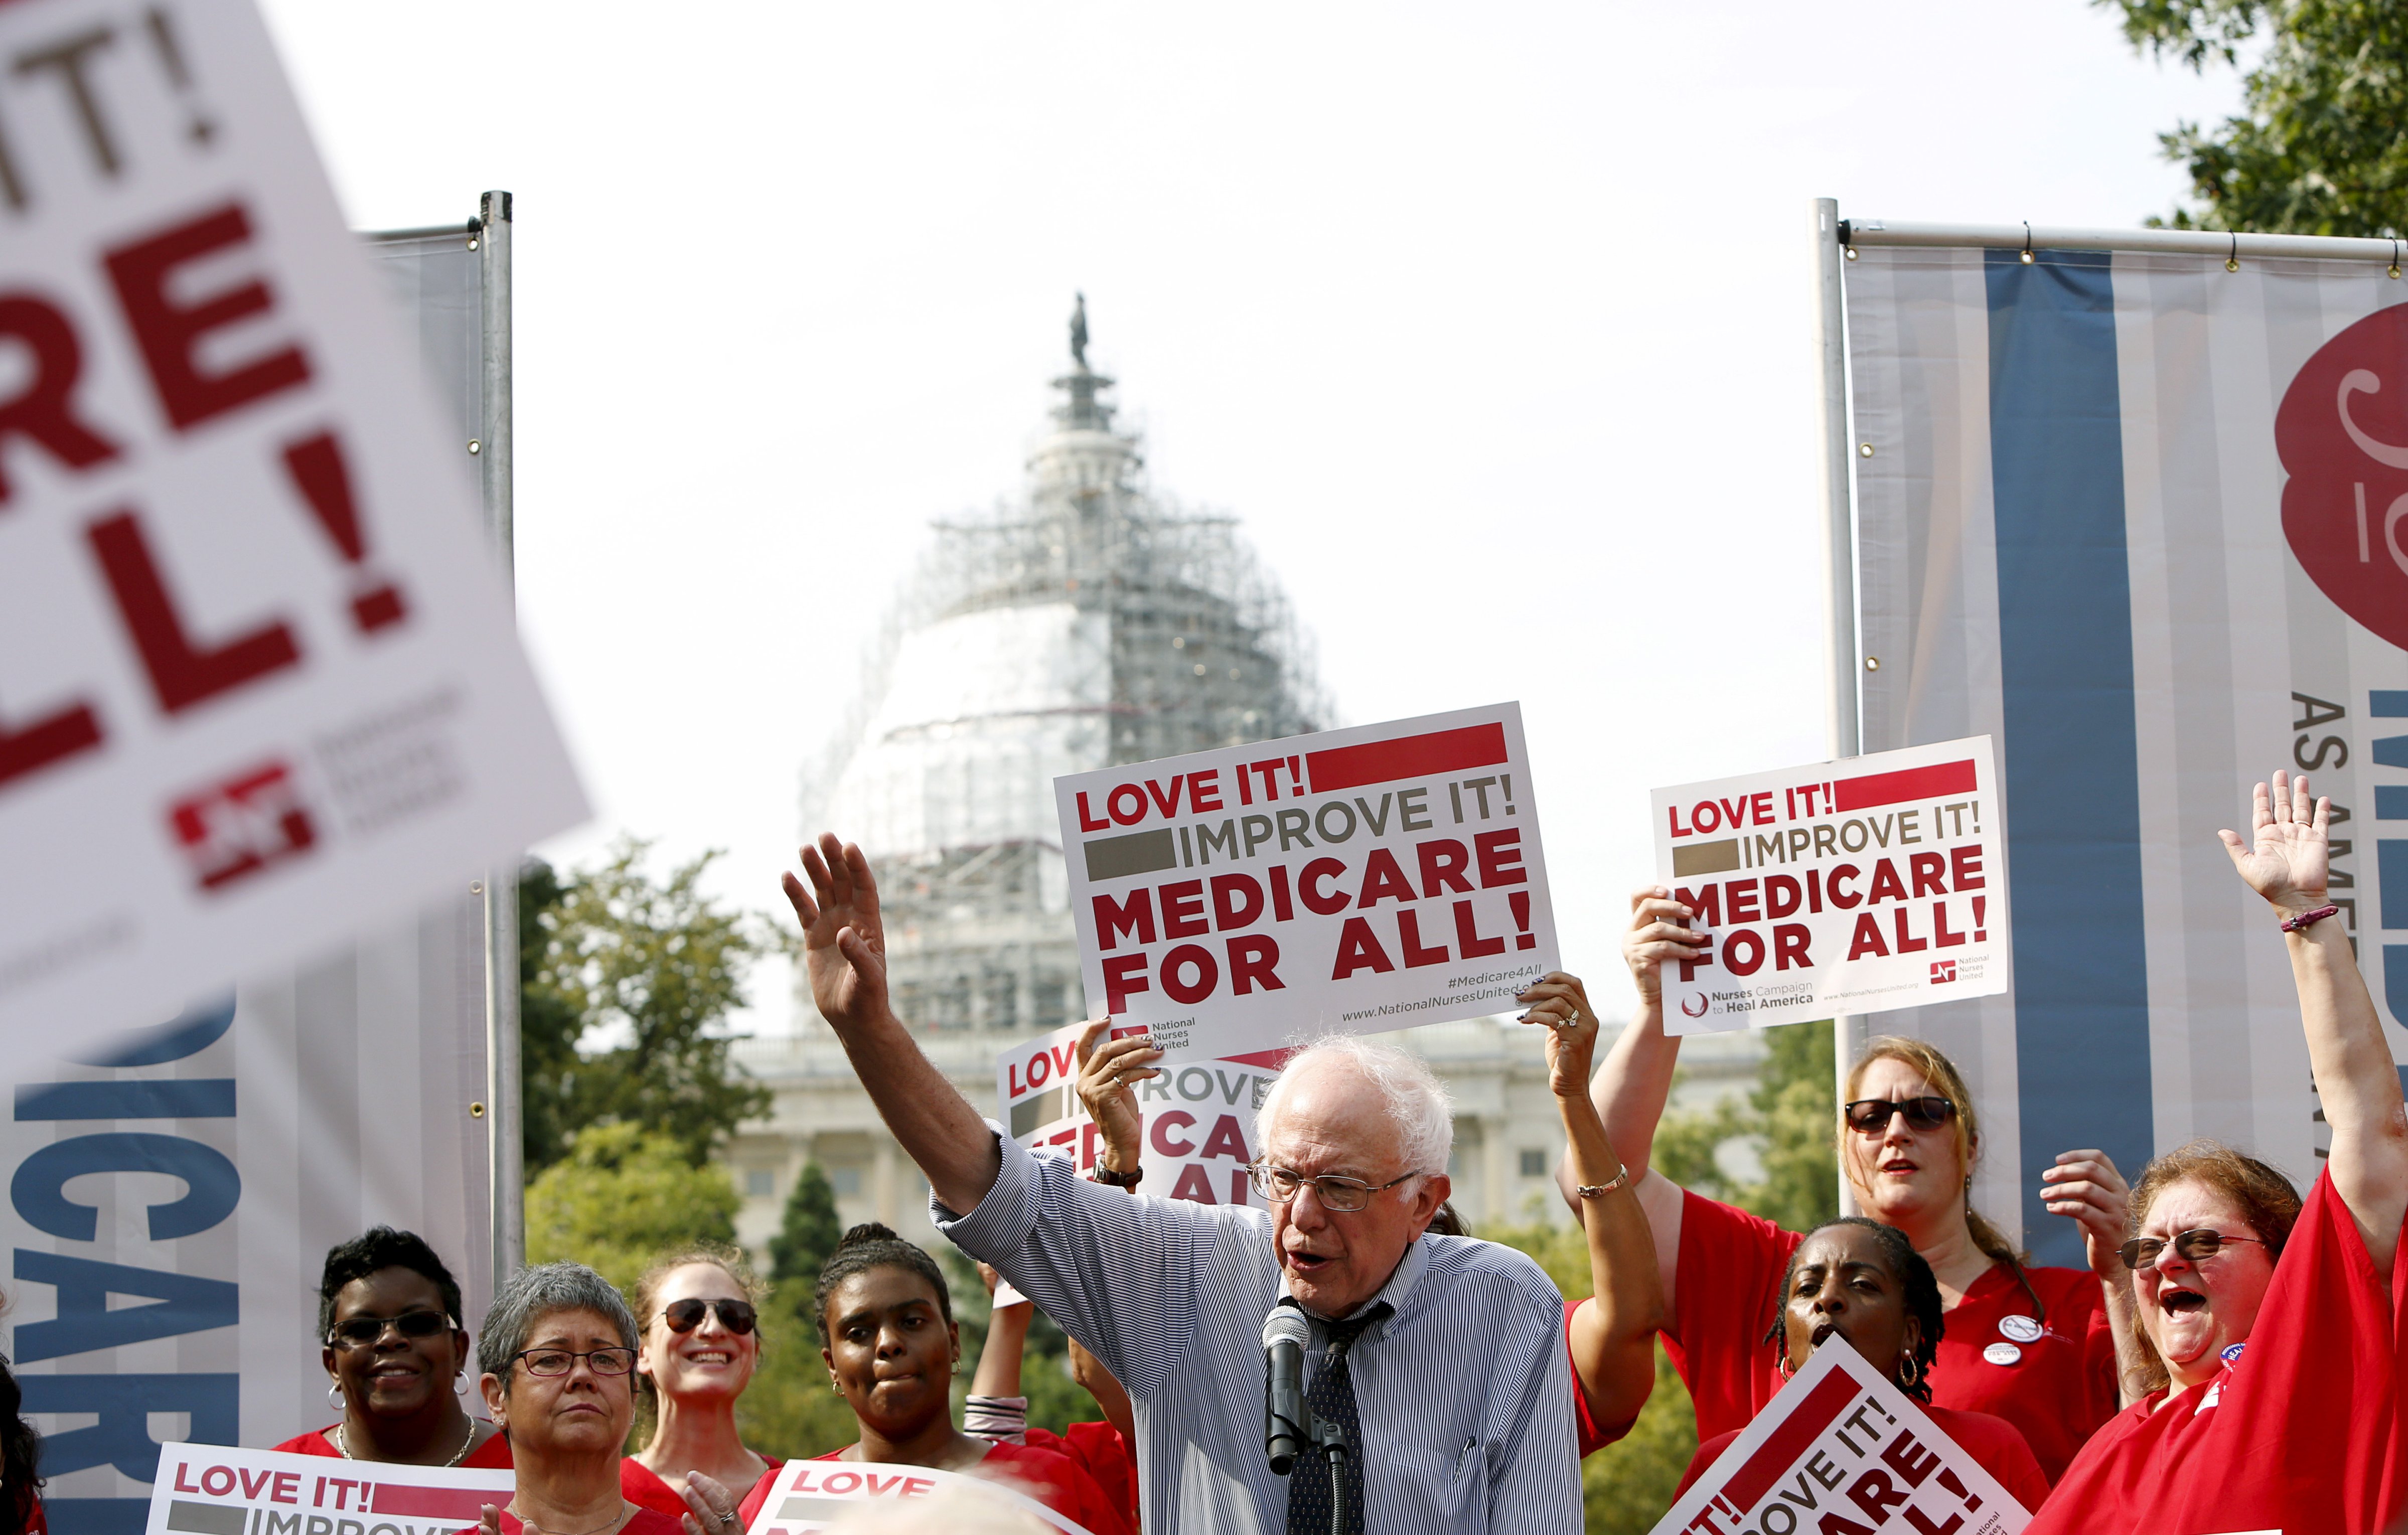 Democratic presidential candidate Bernie Sanders delivers remarks at a National Nurses United event to honor Medicare and Medicaid's 50th anniversary on Capitol Hill in Washington on July 30, 2015. (Gary Cameron—Reuters)